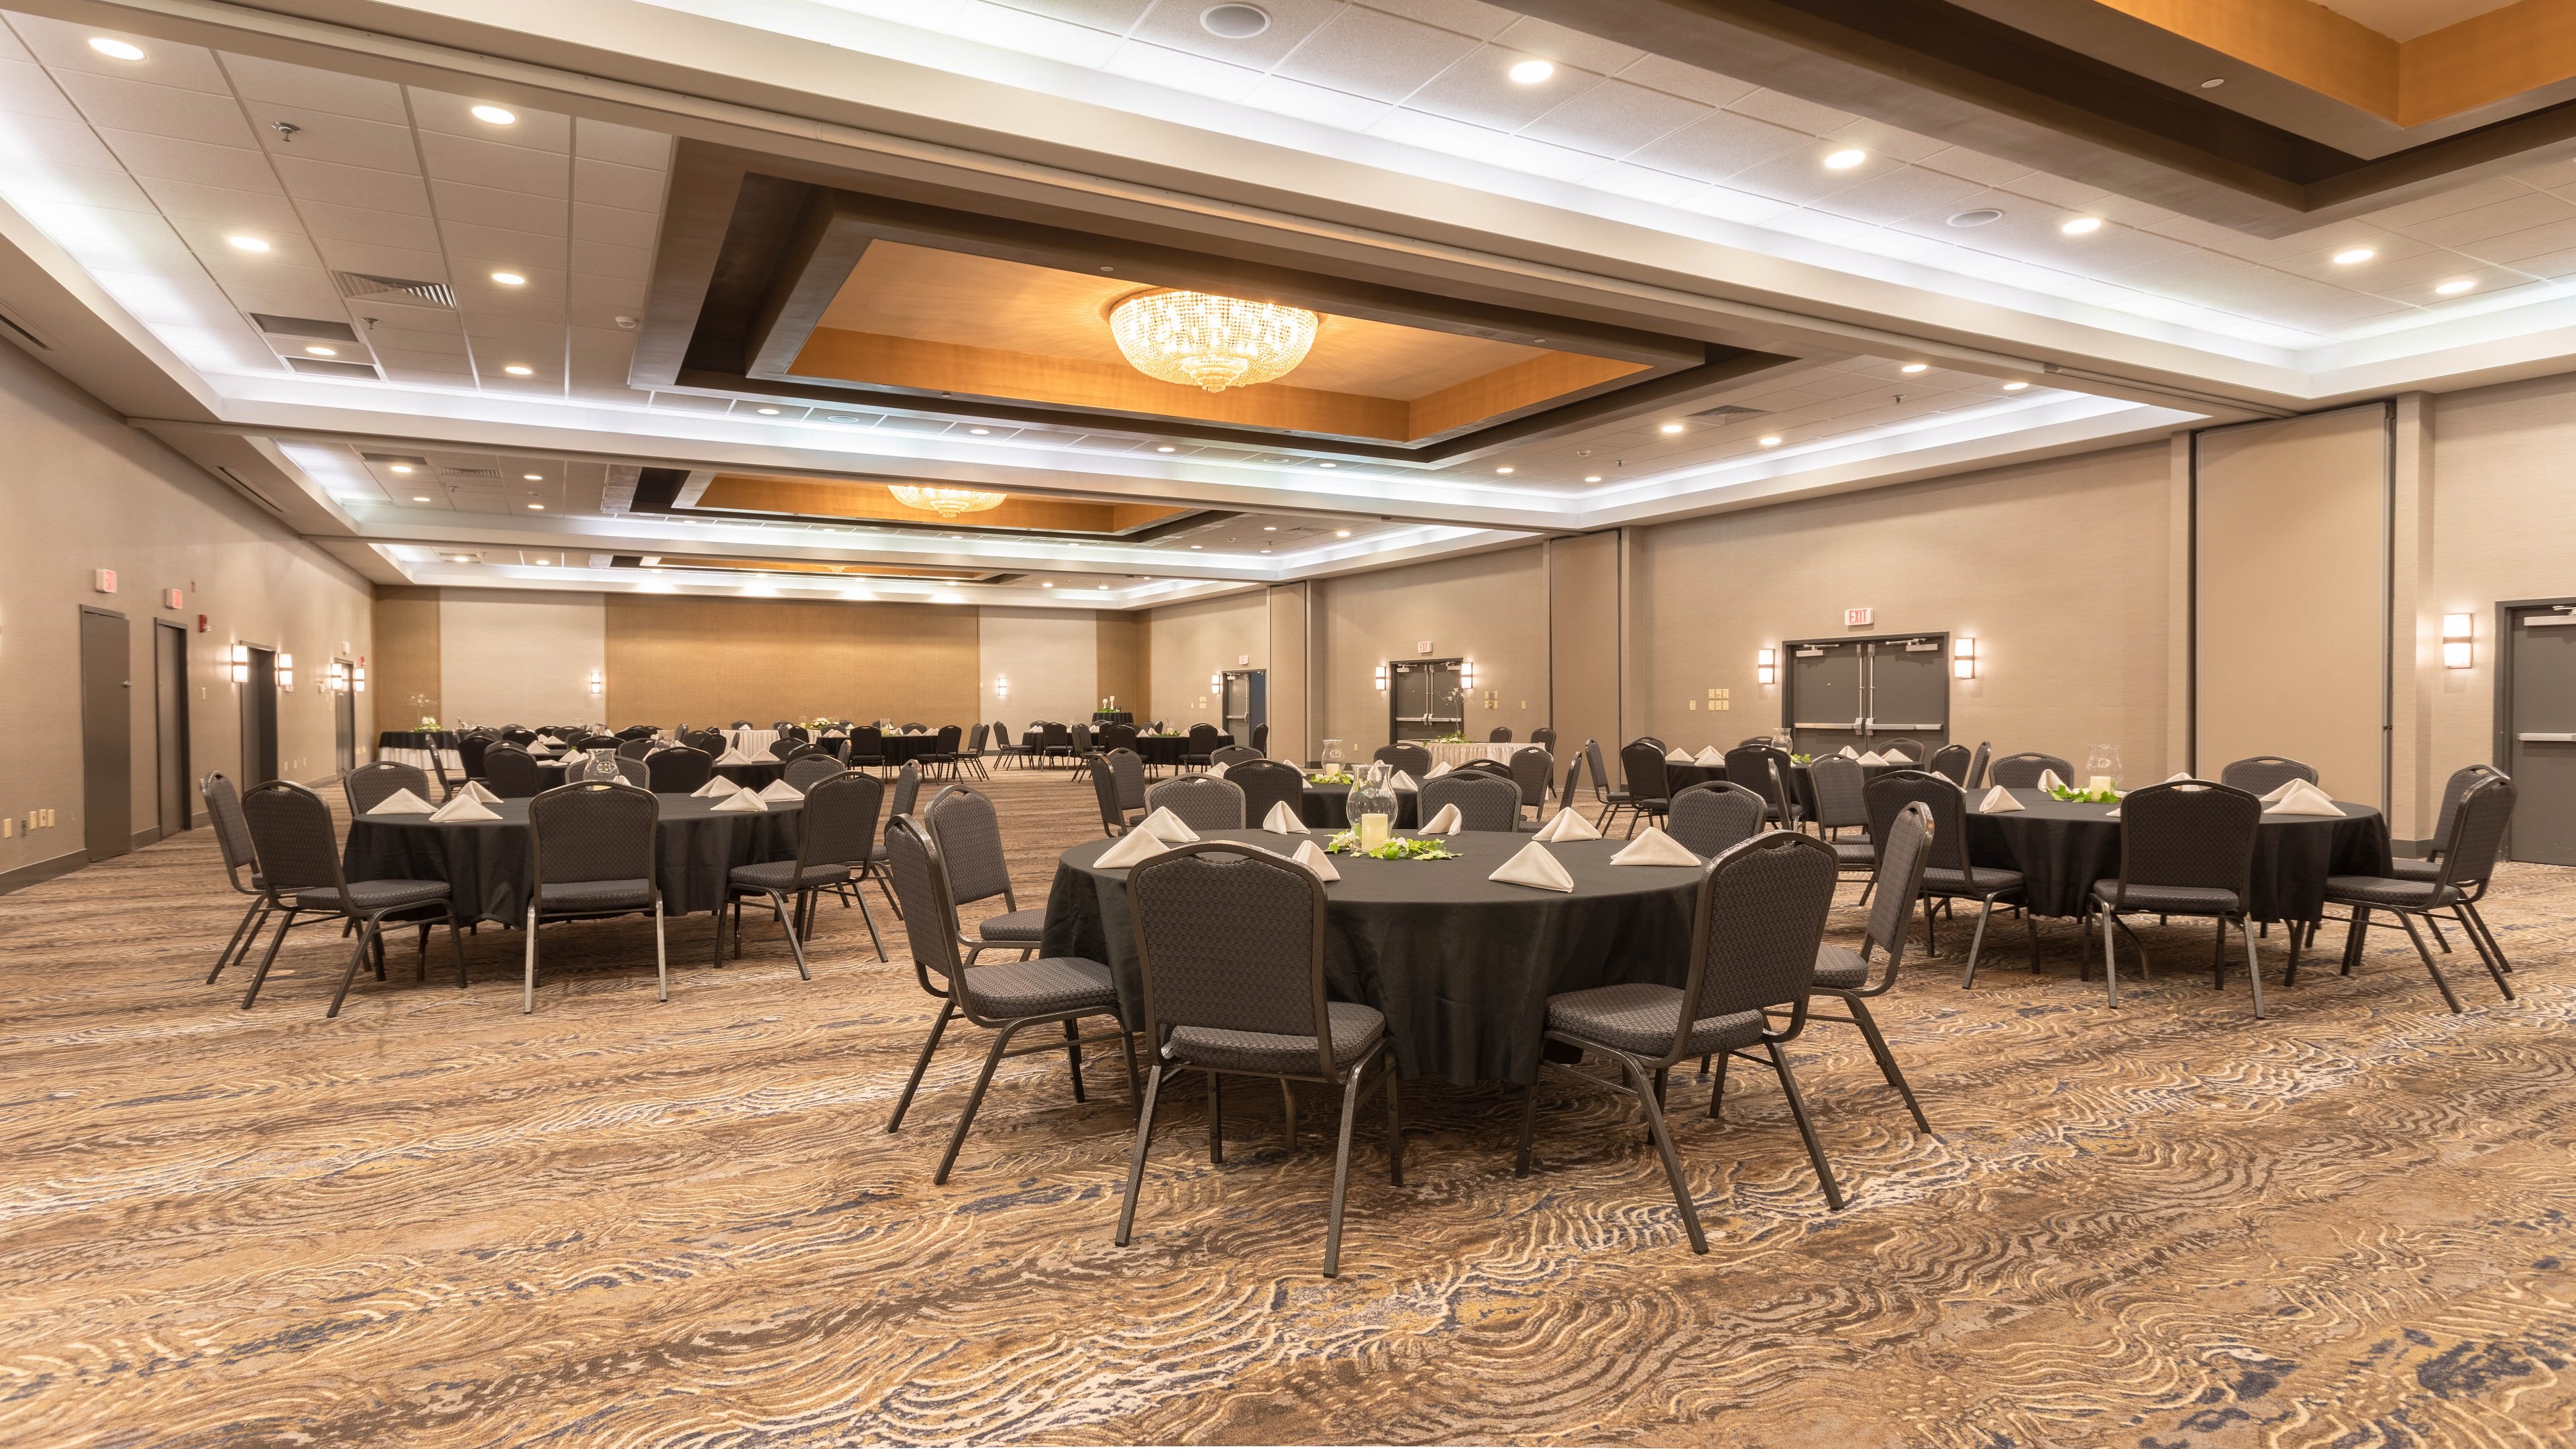 Over 11,500 sq ft of flexible conference space for any event